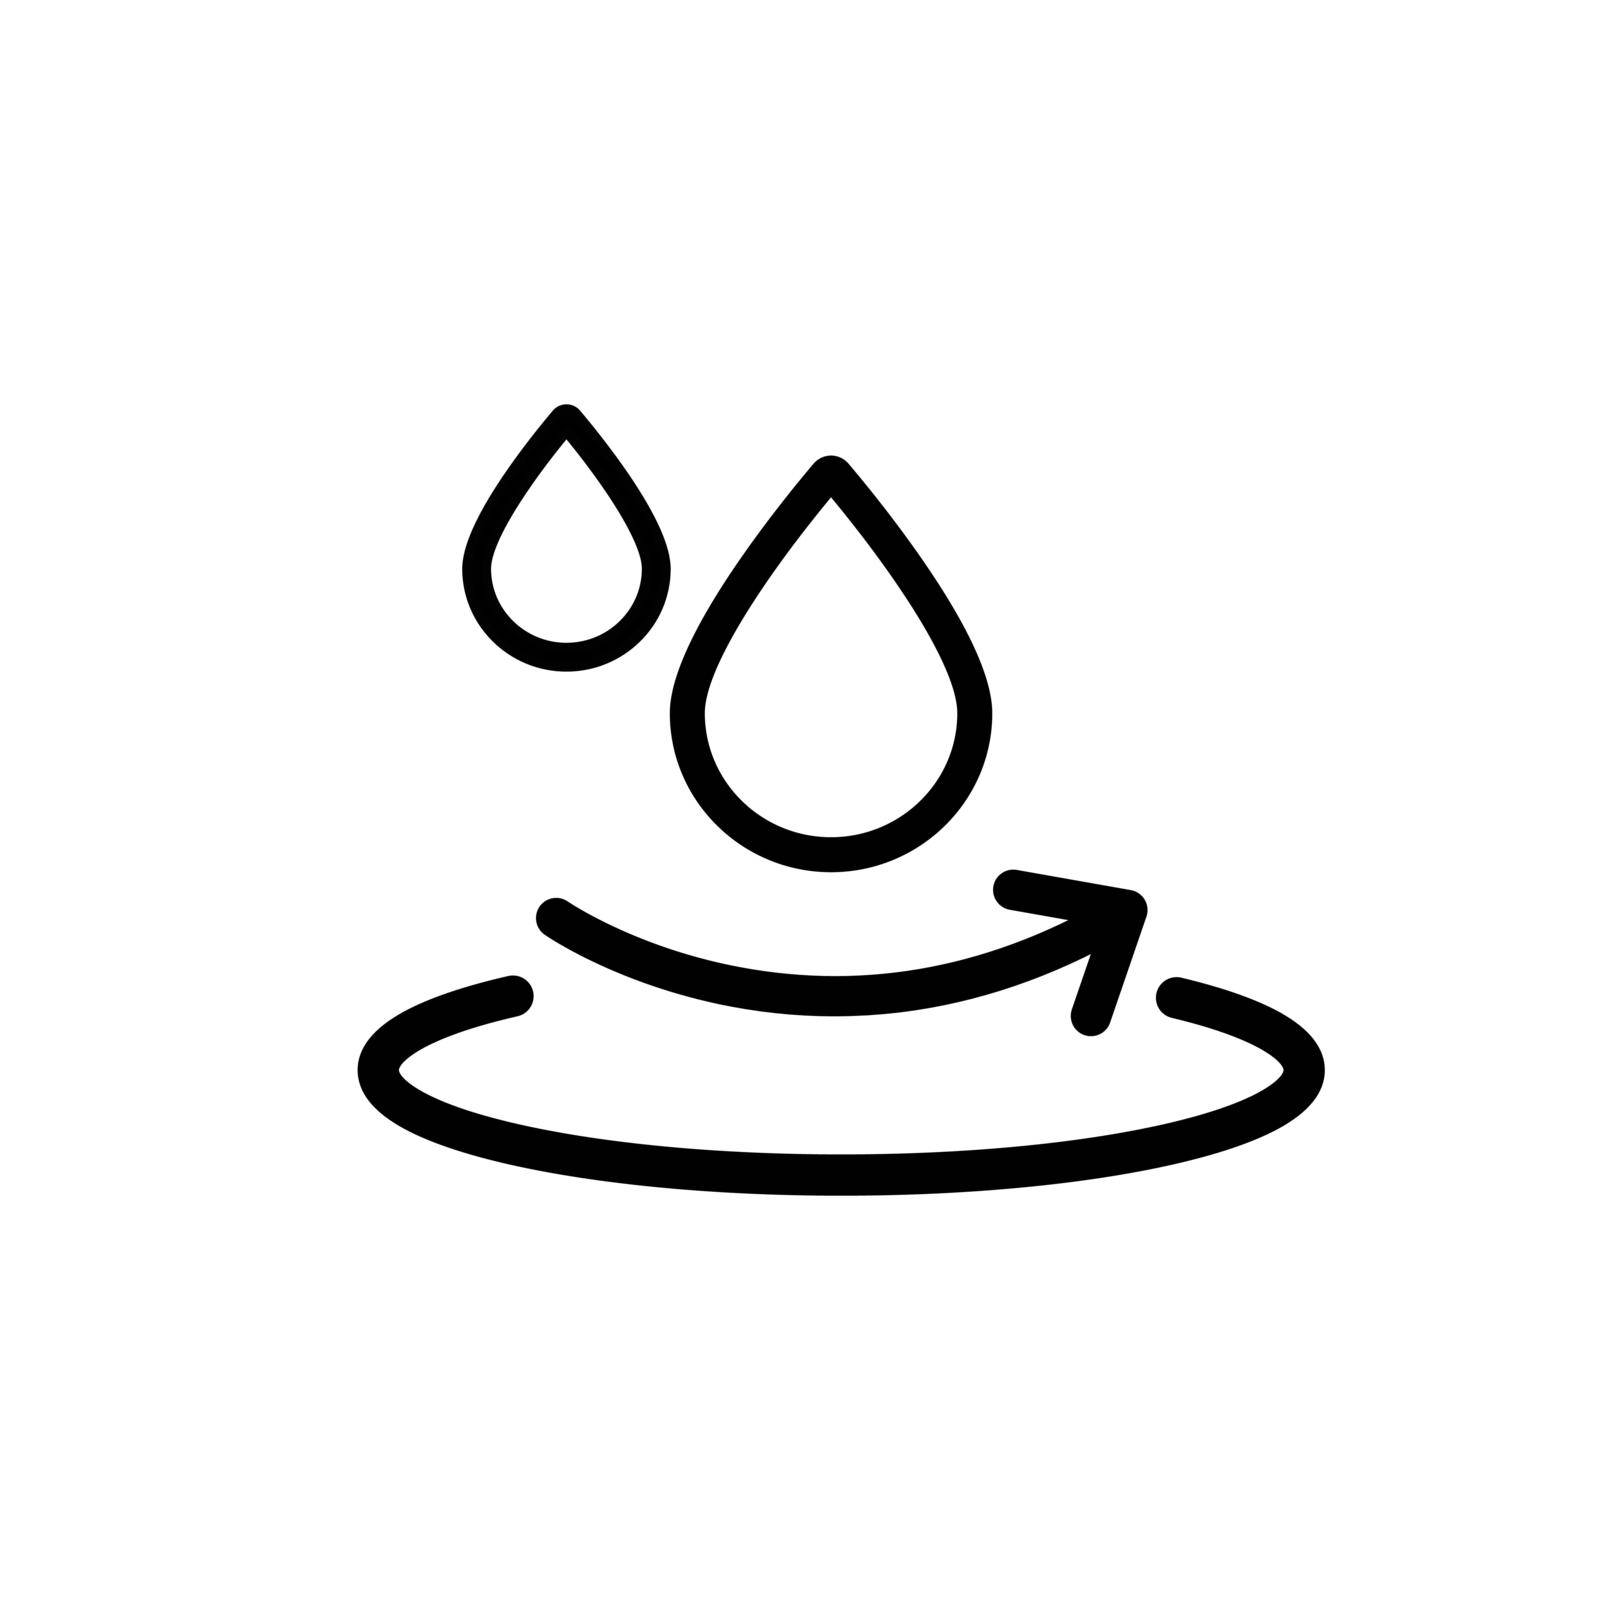 Waterproof icon, water protection icon ,label sticker logo by Olgaufu